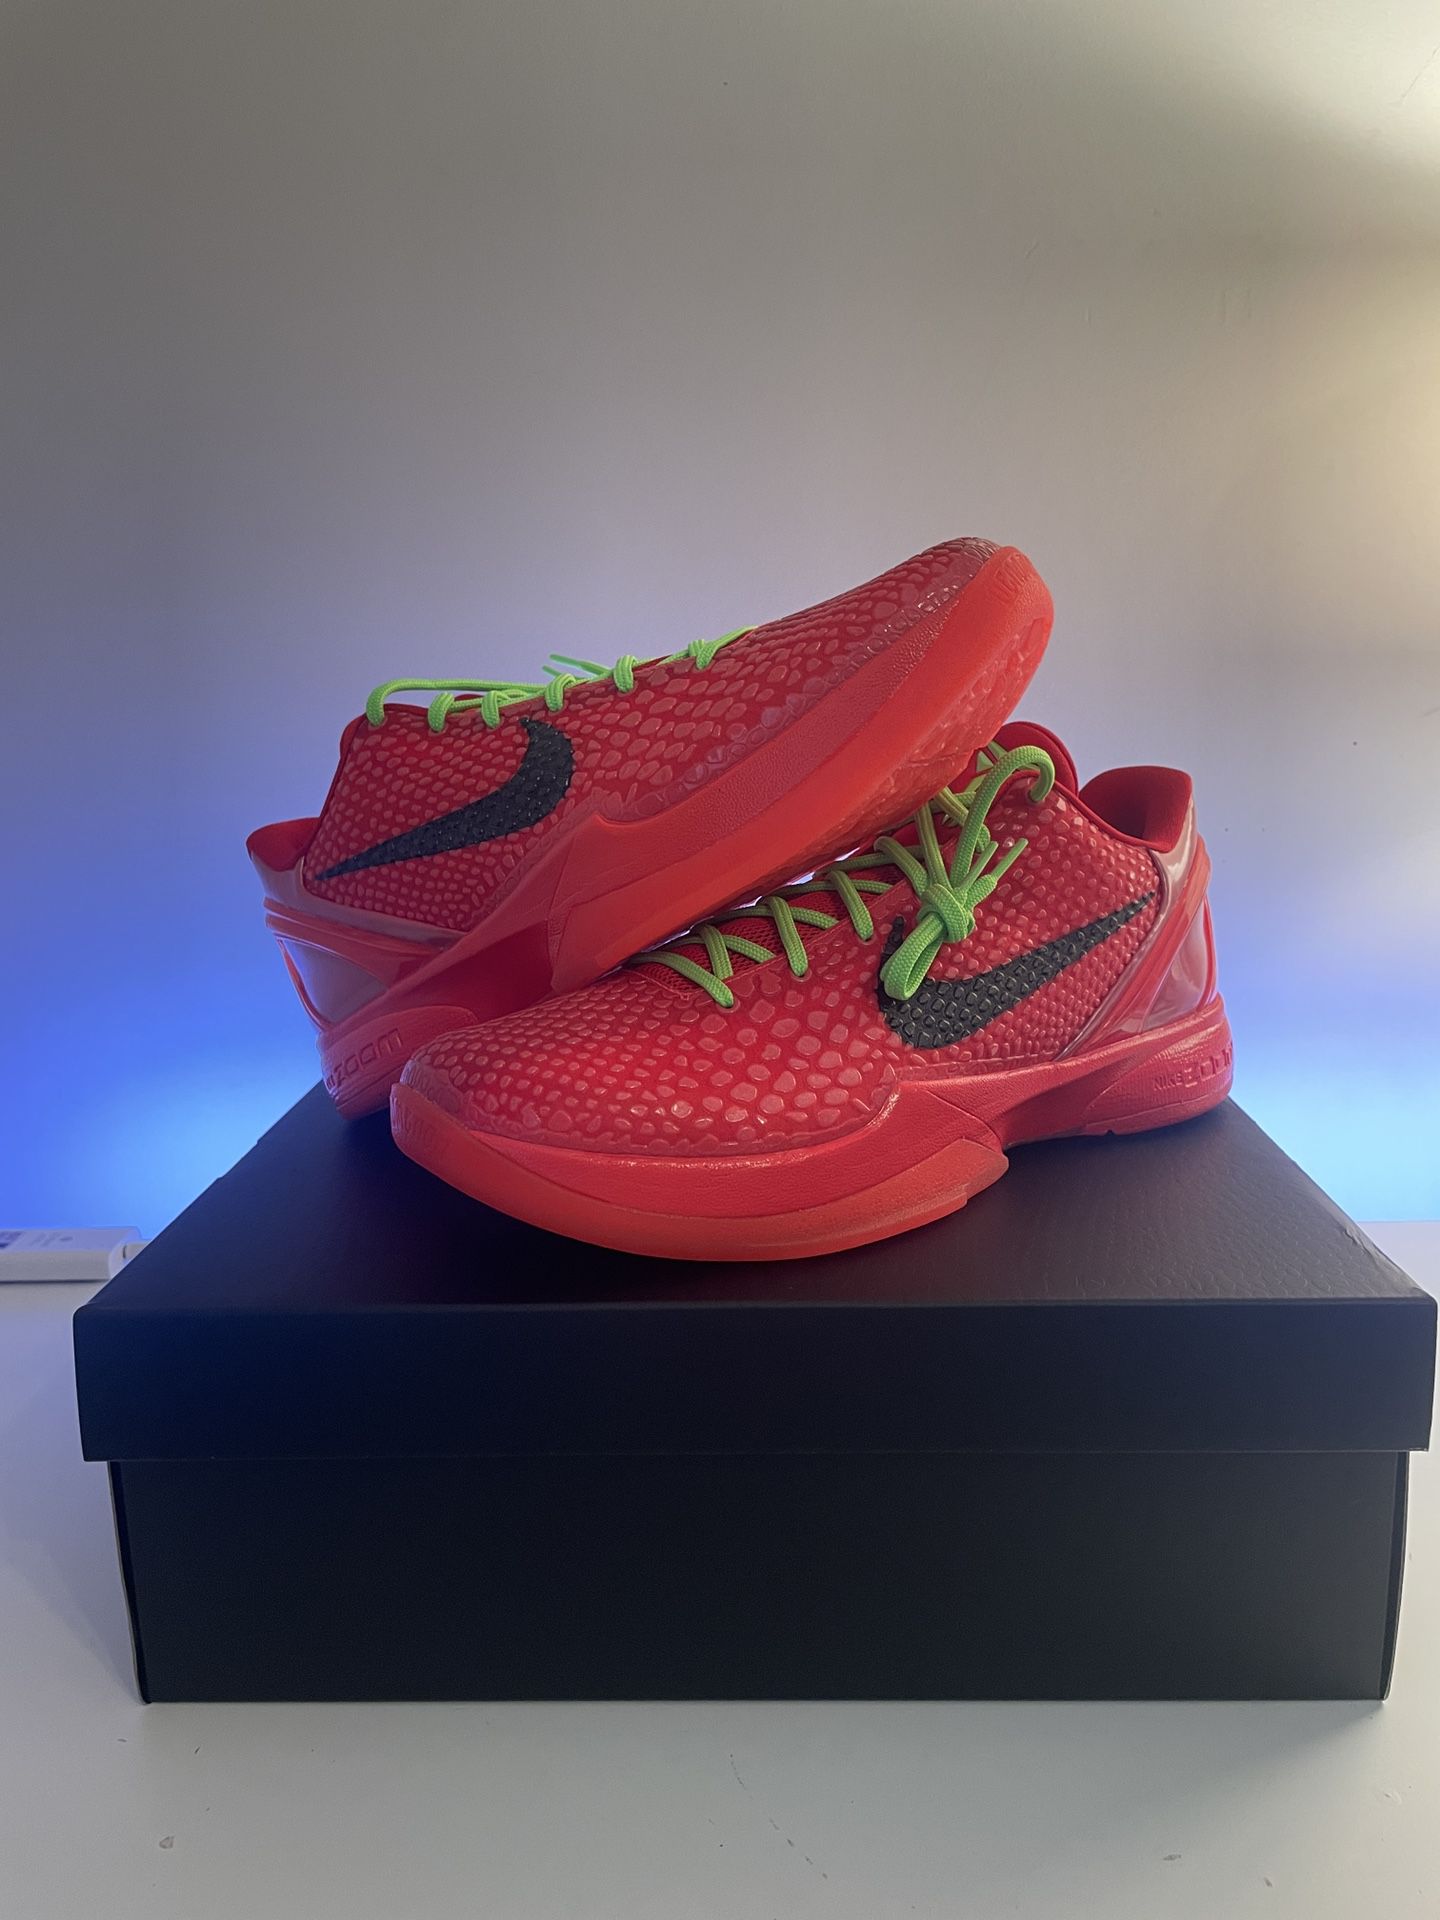 Kobe 6 Protro “Reverse Grinch” Size 12  (Order Confirmed From Nike)